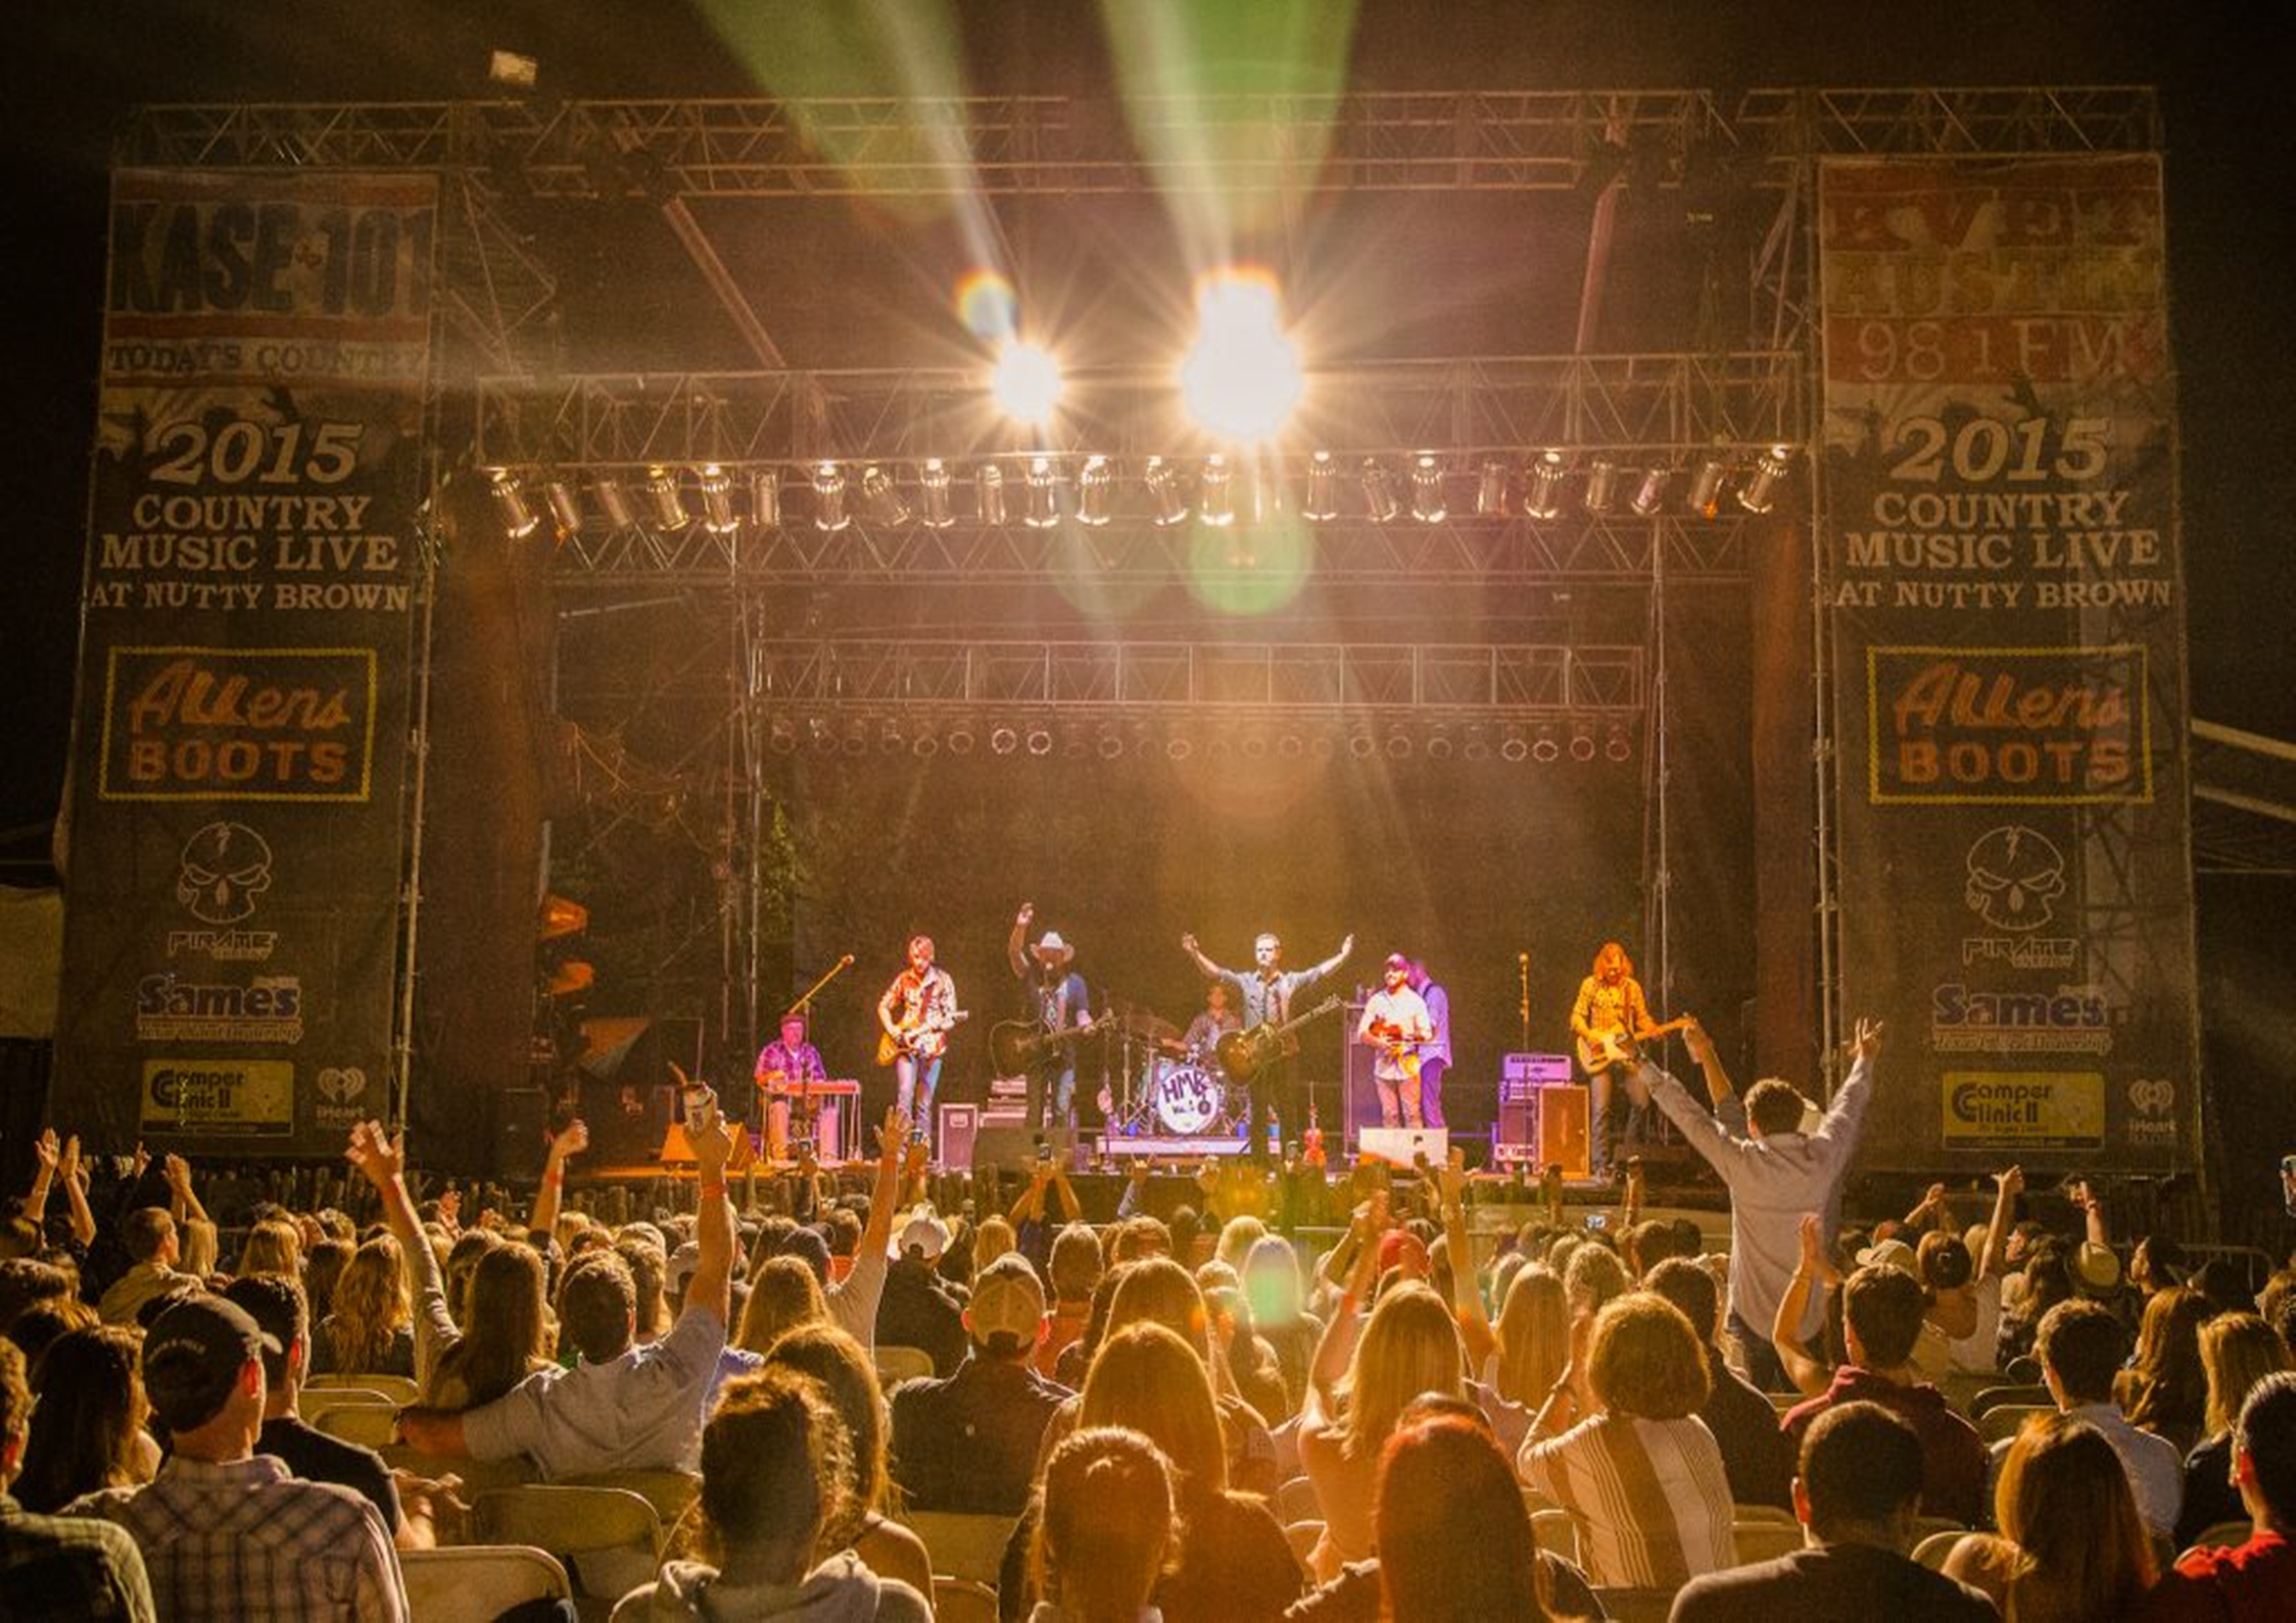 A view of a crowded night at the Nutty Brown Amphitheater in Austin, Texas.